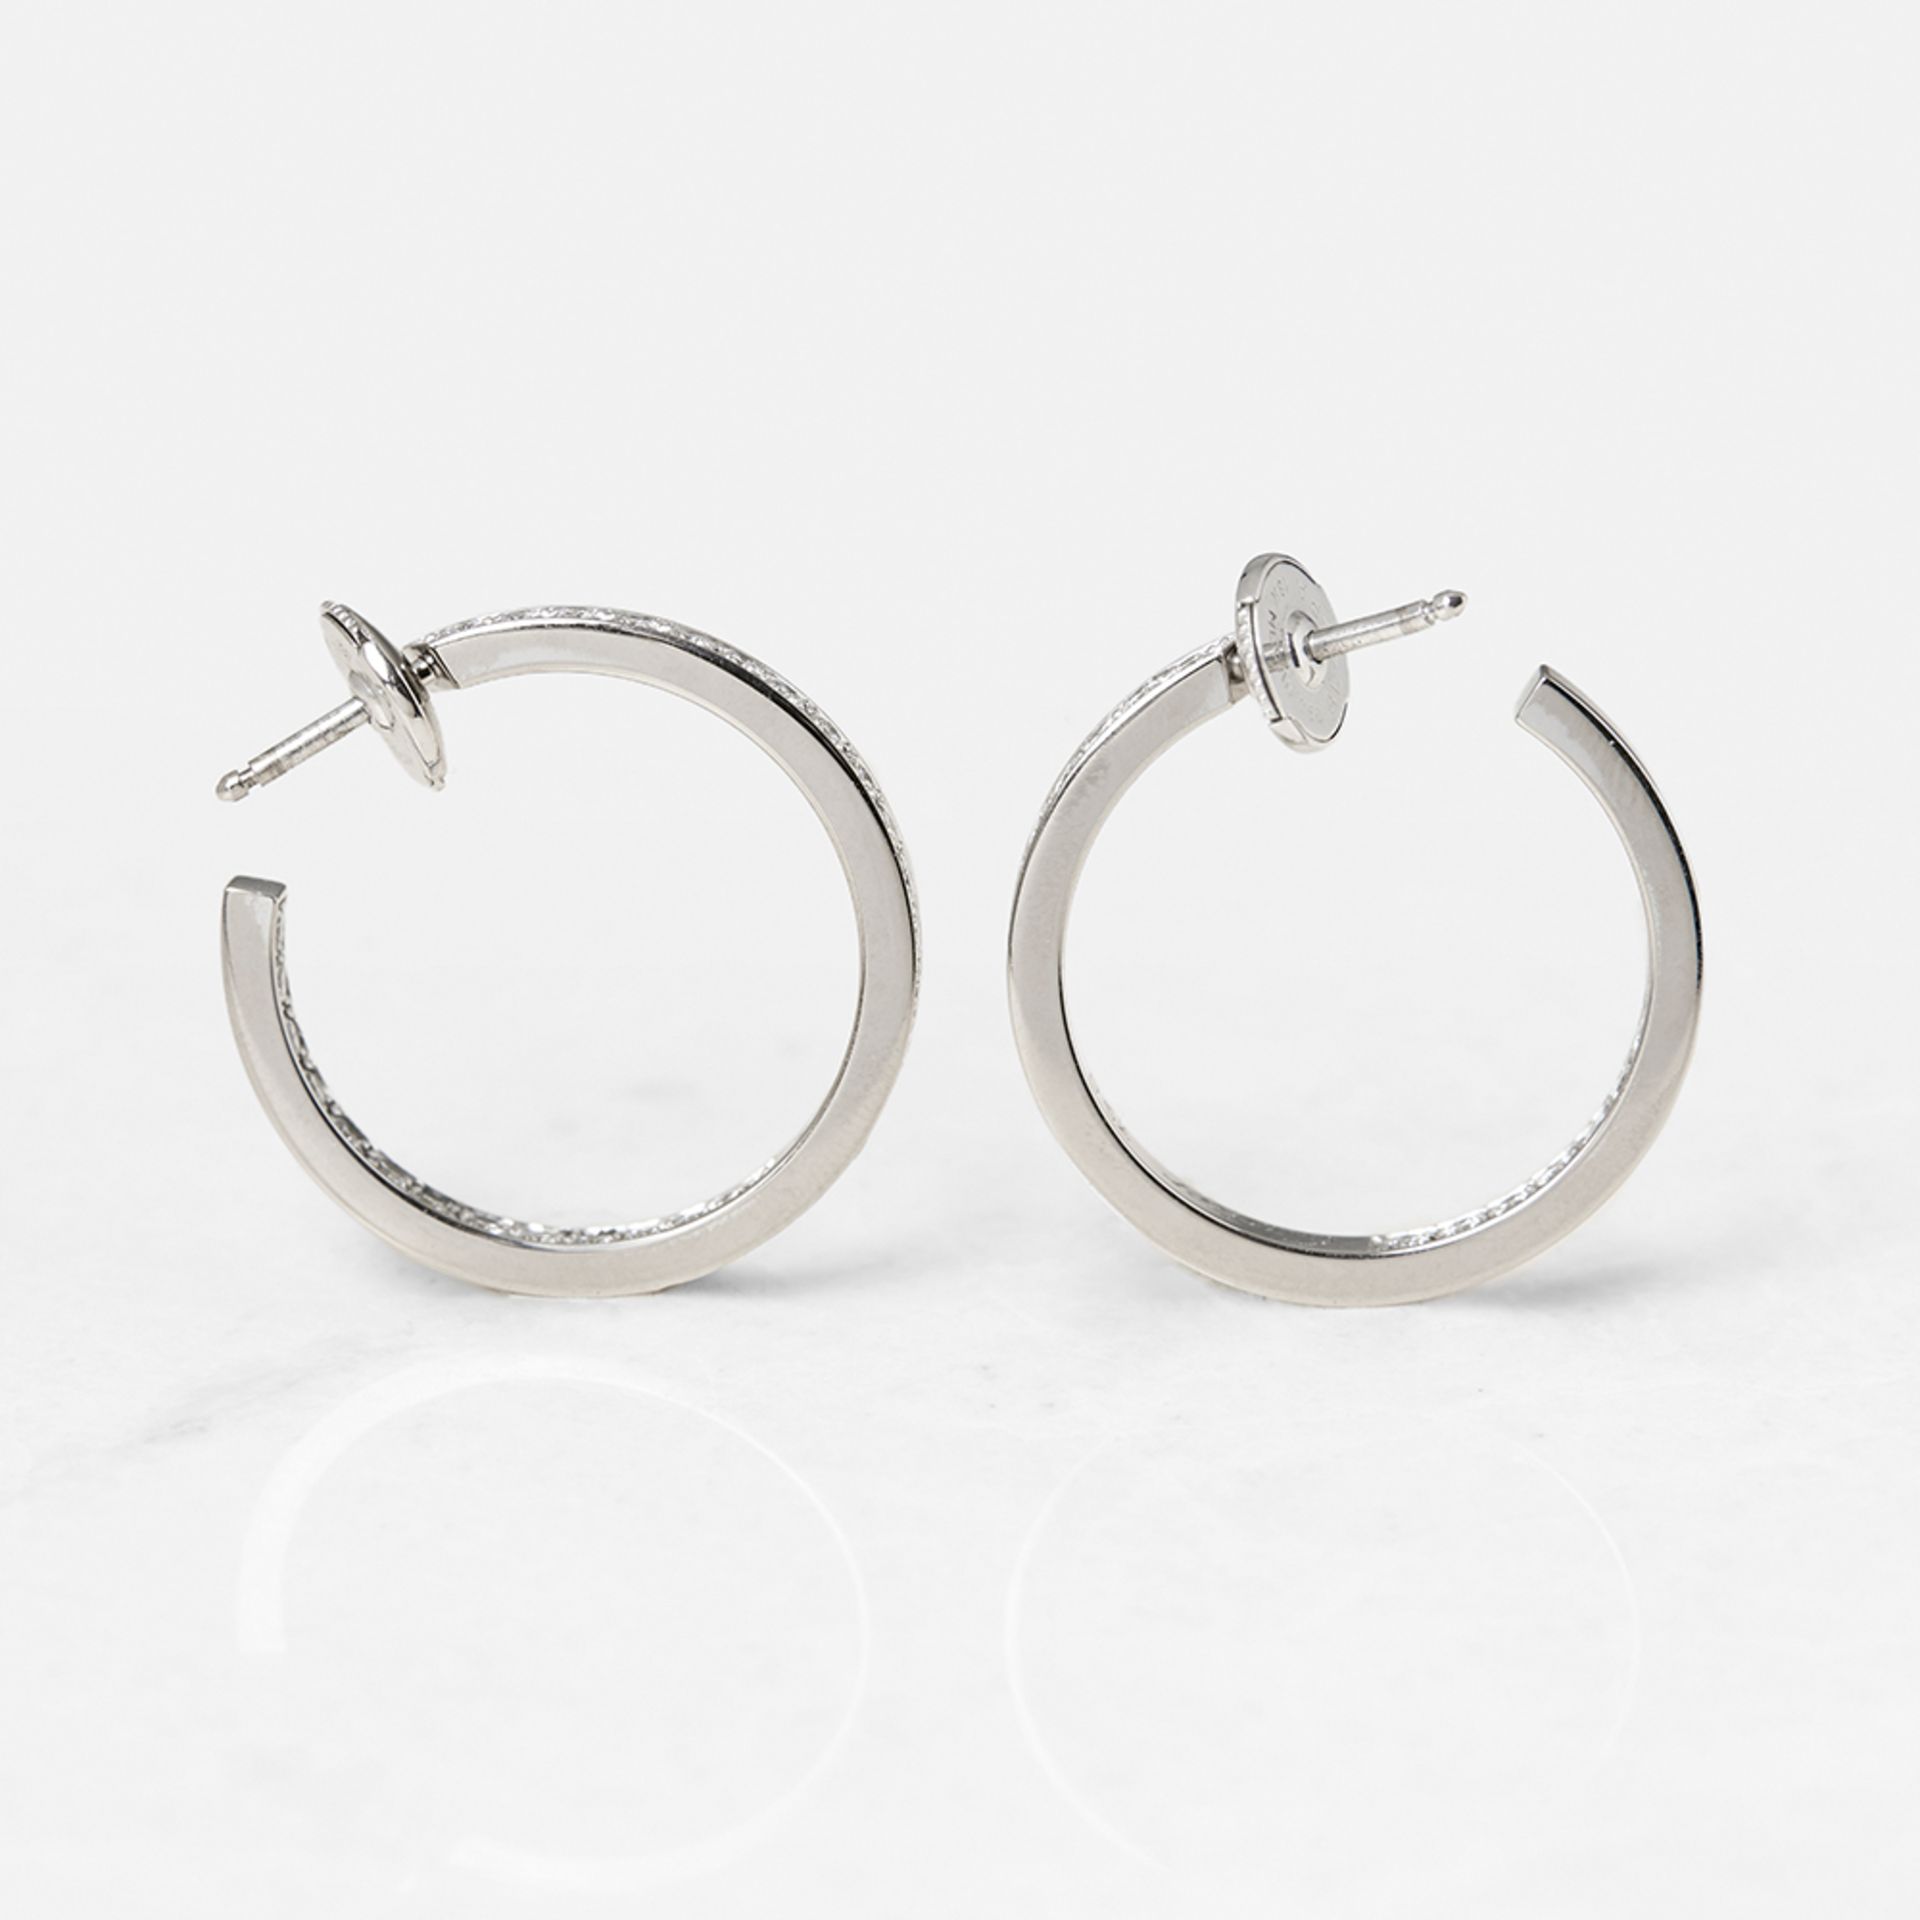 Cartier 18k White Gold 1.20ct Diamond Inside Out Hoop Earrings - Image 6 of 14